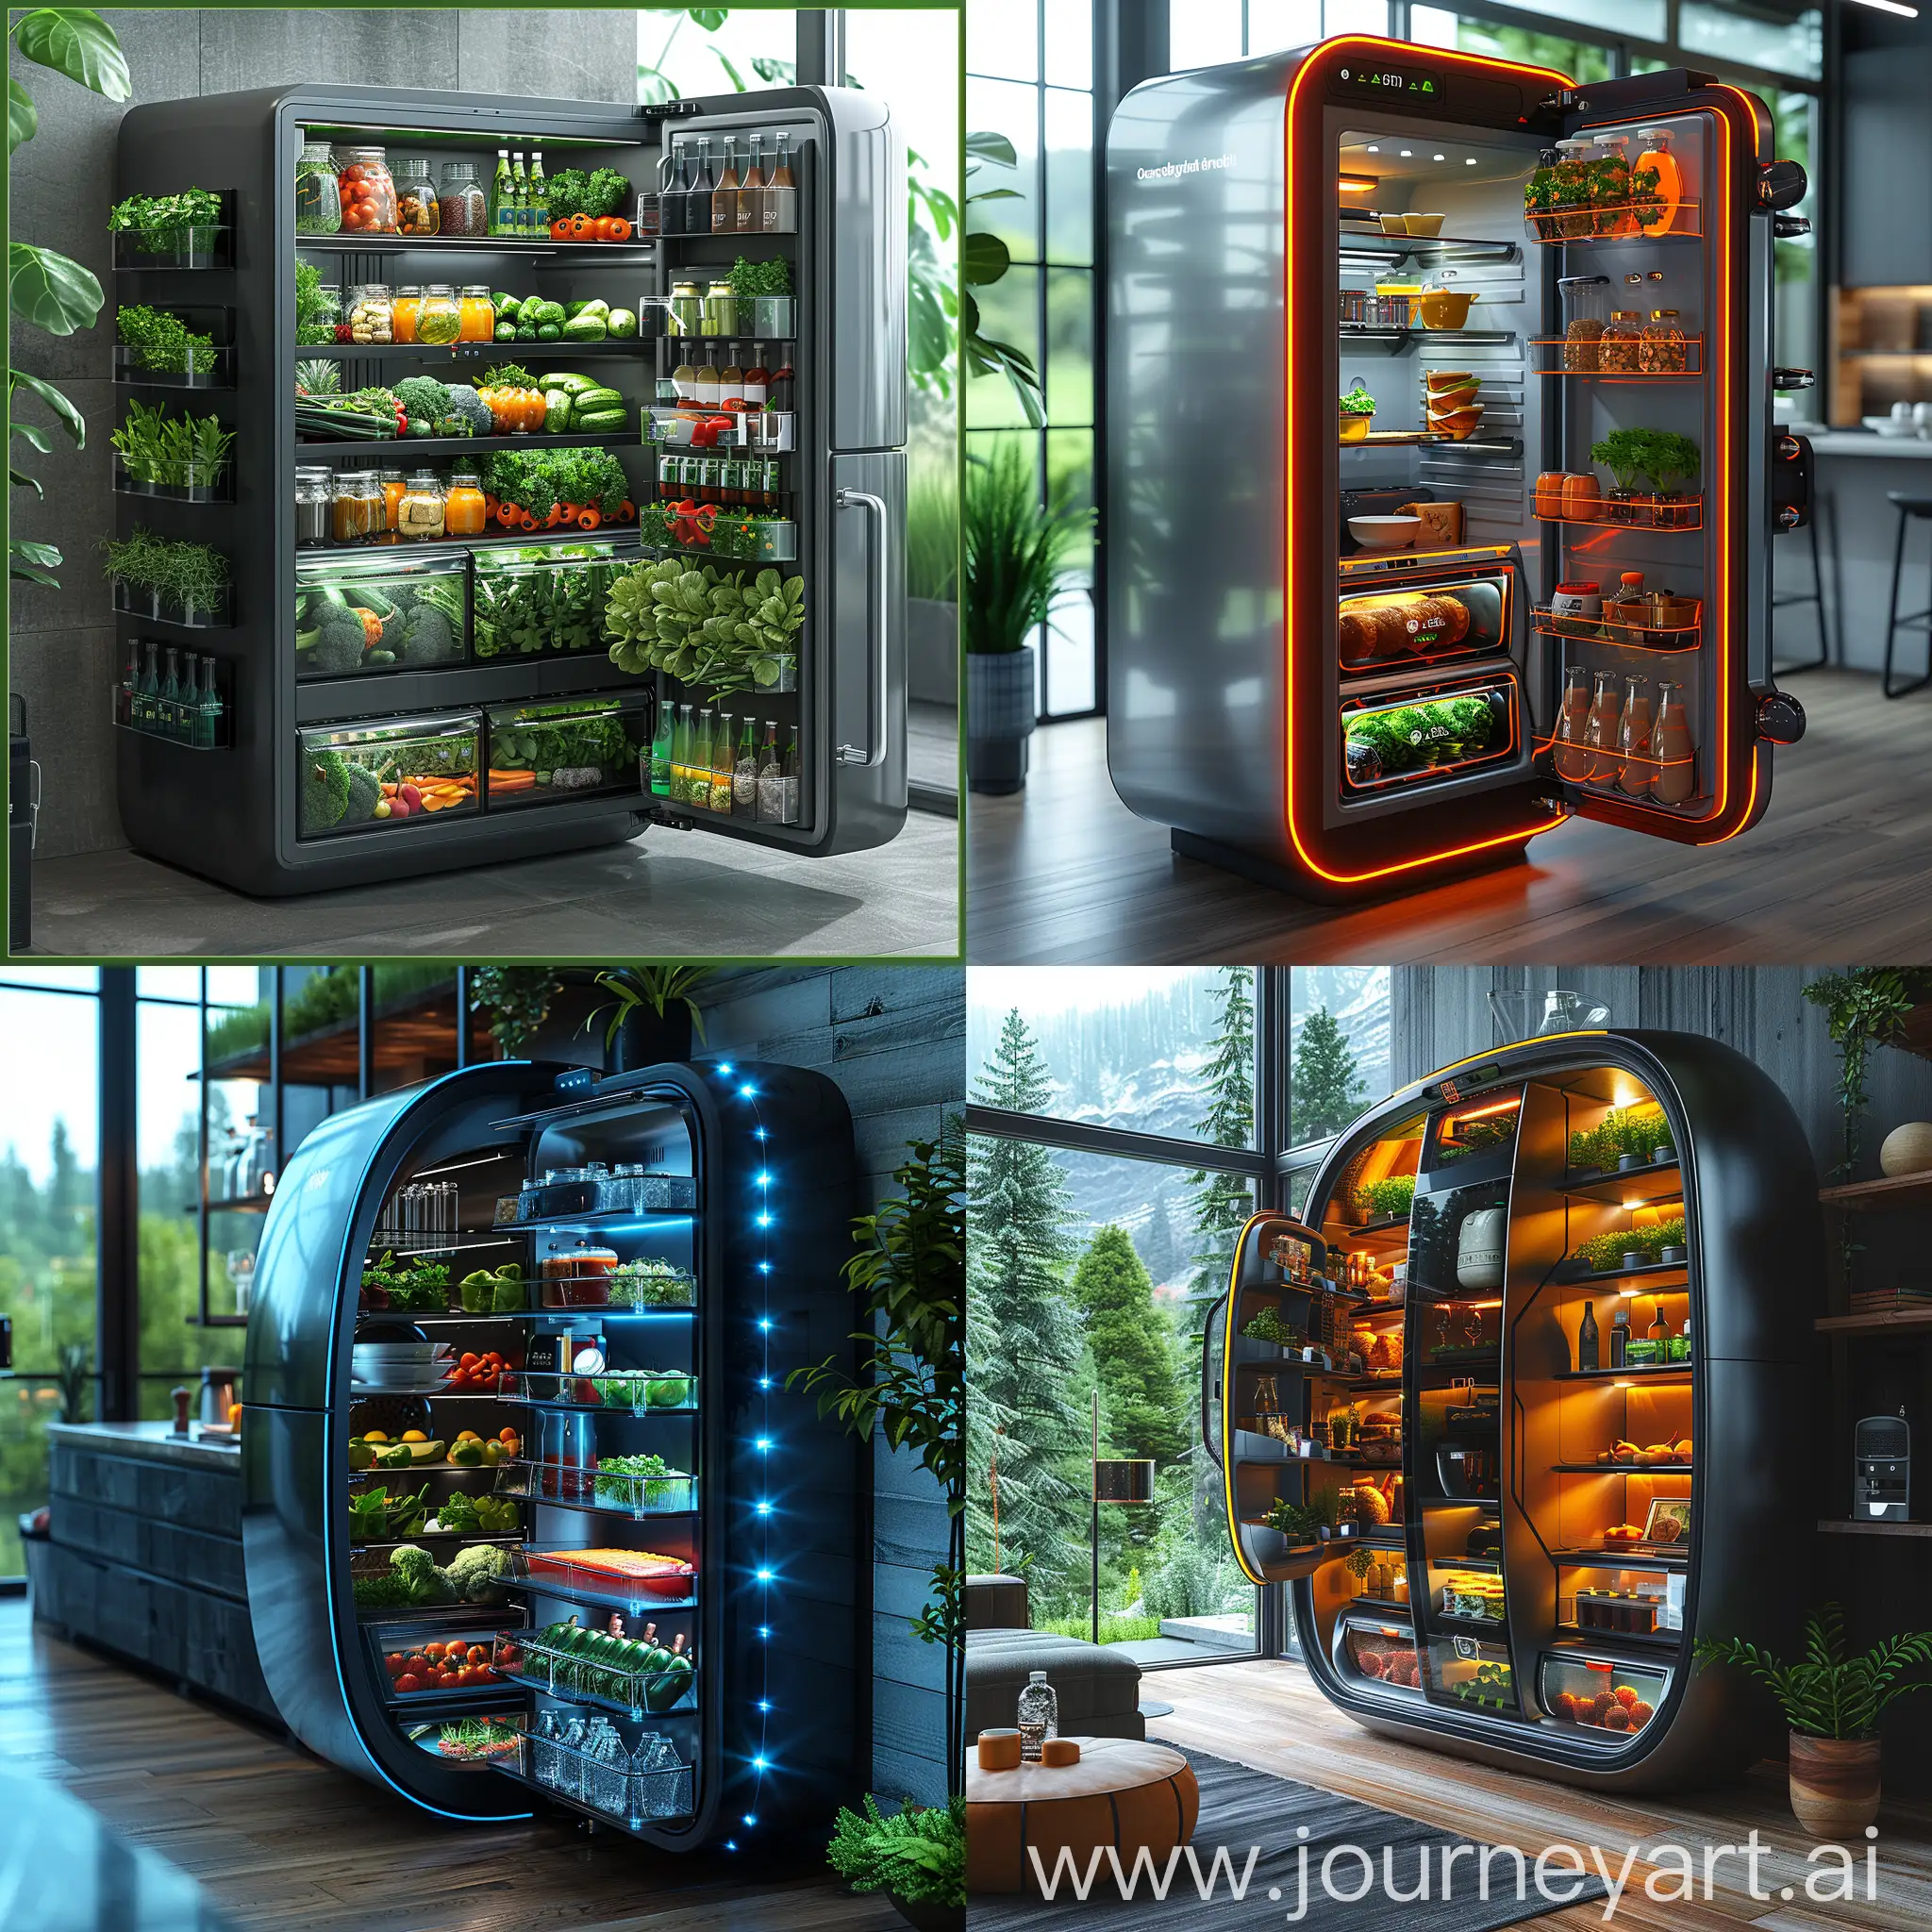 Futuristic fridge, Energy-efficient cooling system, Solar-powered option, Temperature sensors, Vacuum insulation panels, Eco-friendly refrigerants, Water-saving features, Recycled materials, Air purification system, Smart storage solutions, Energy monitoring and remote control, AI-powered food recognition, Voice control and integration, Built-in cameras, Interactive touchscreen display, Automated inventory management, Customized temperature zones, Self-cleaning technology, Internet connectivity, Energy usage optimization, Augmented reality features, Smart speaker integration, Coffee maker, Digital assistant display, Air quality monitor, Streaming services, Health tracking features, Projector display, Bluetooth connectivity, Smart home hub, Wireless charging station, octane render --stylize 1000